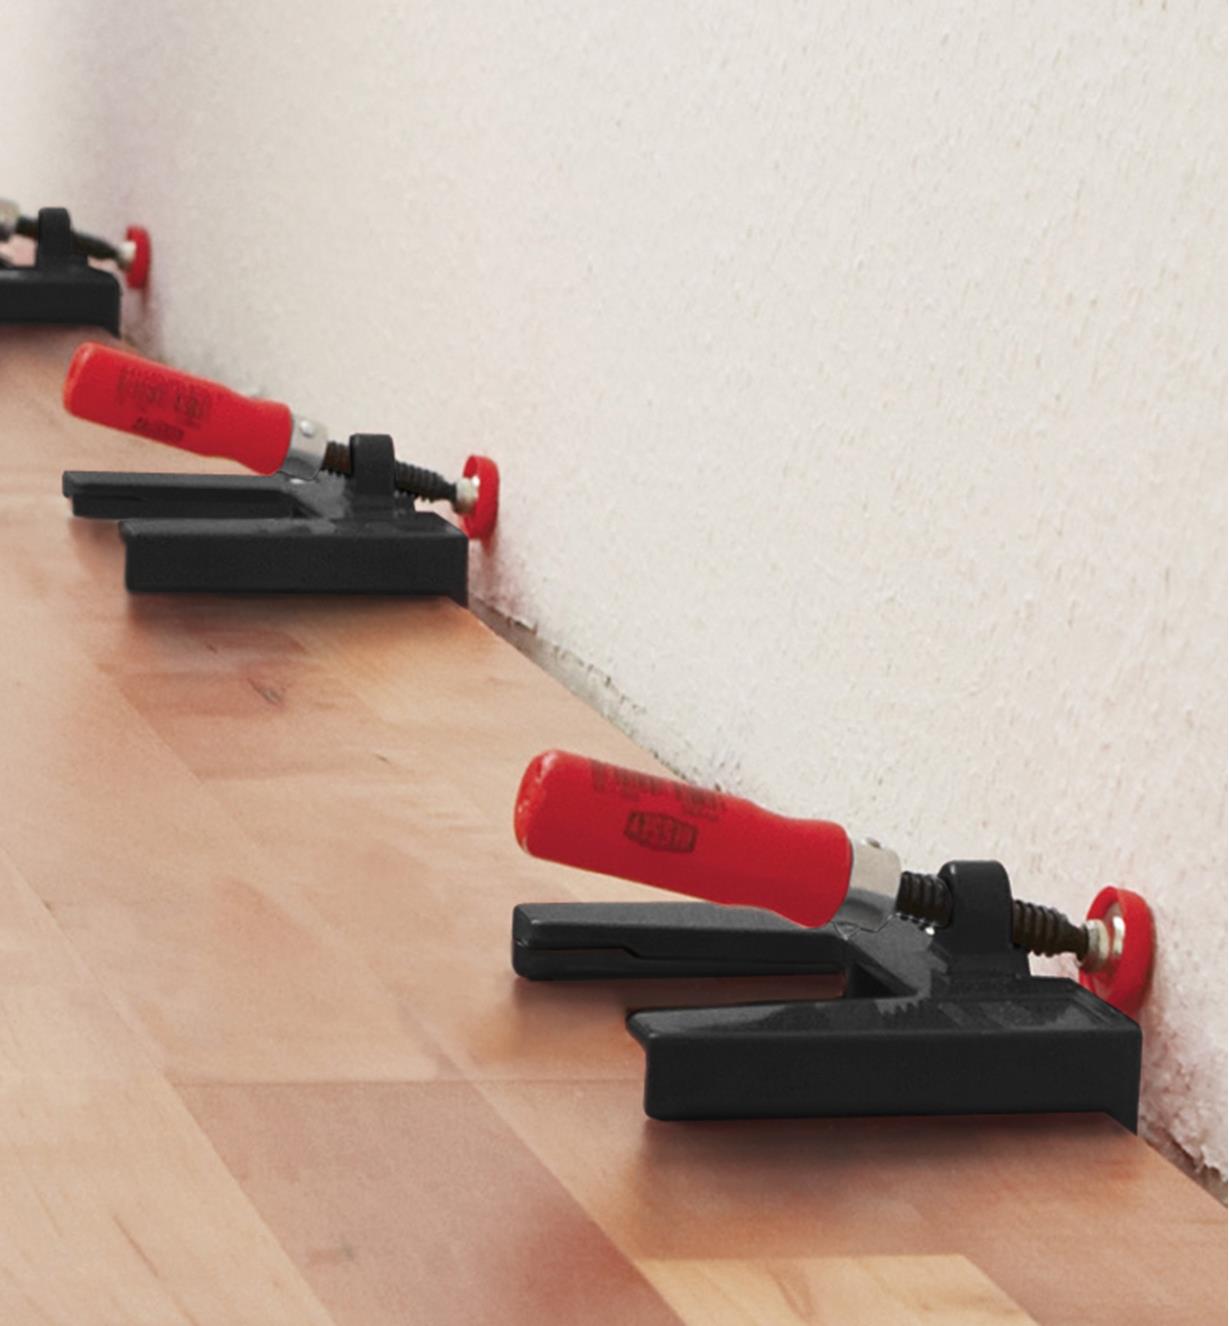 Bessey flooring spacer clamps being used to offset flooring materials from a wall